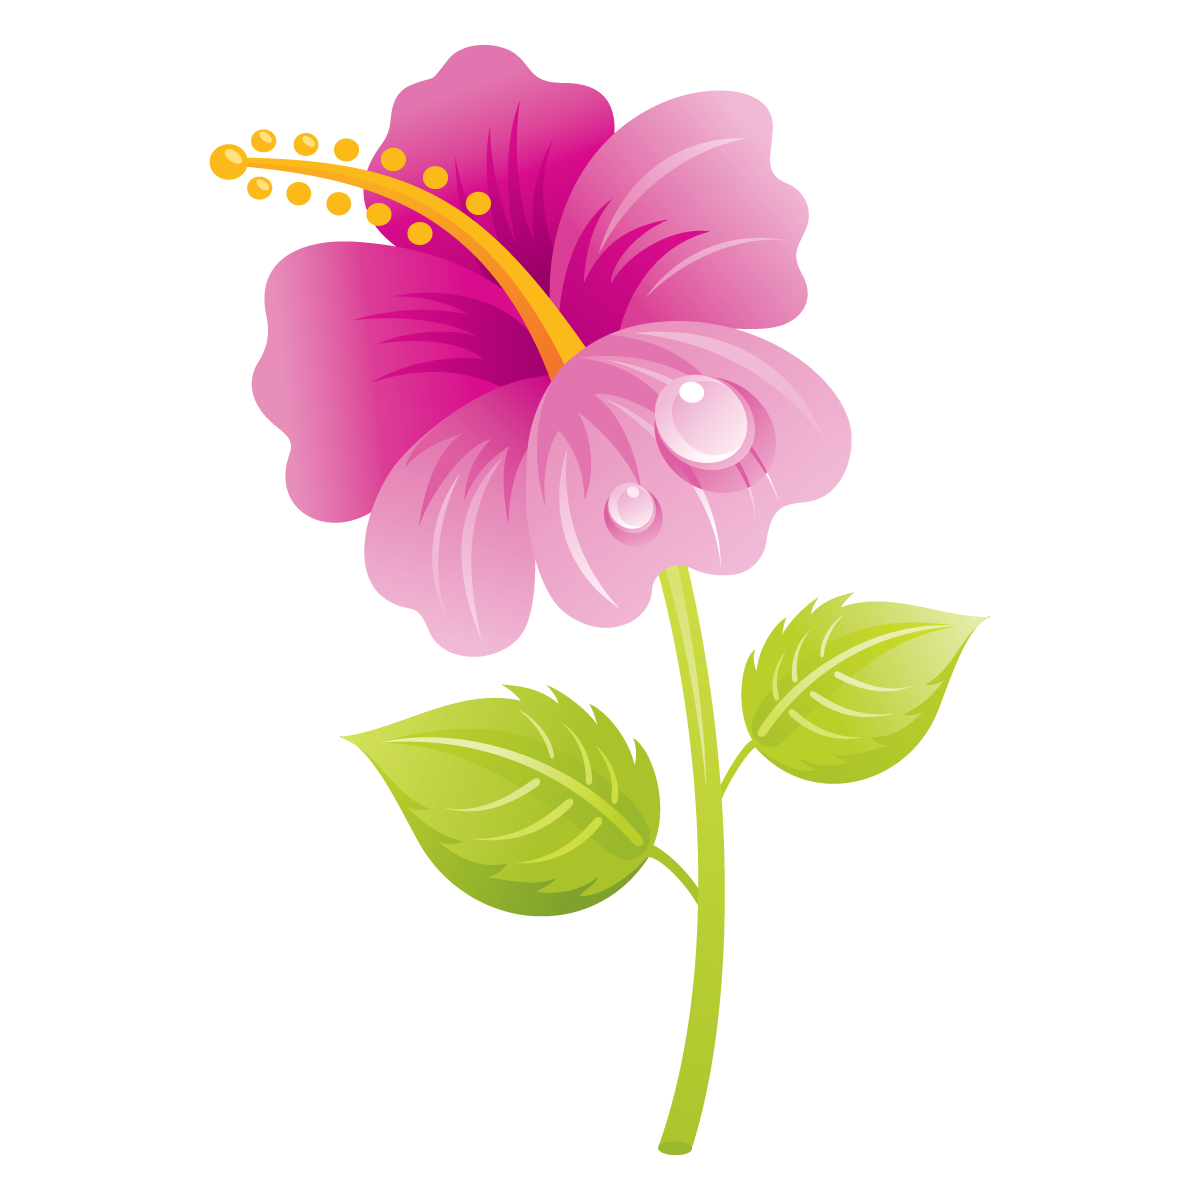 mothers day flowers clipart.